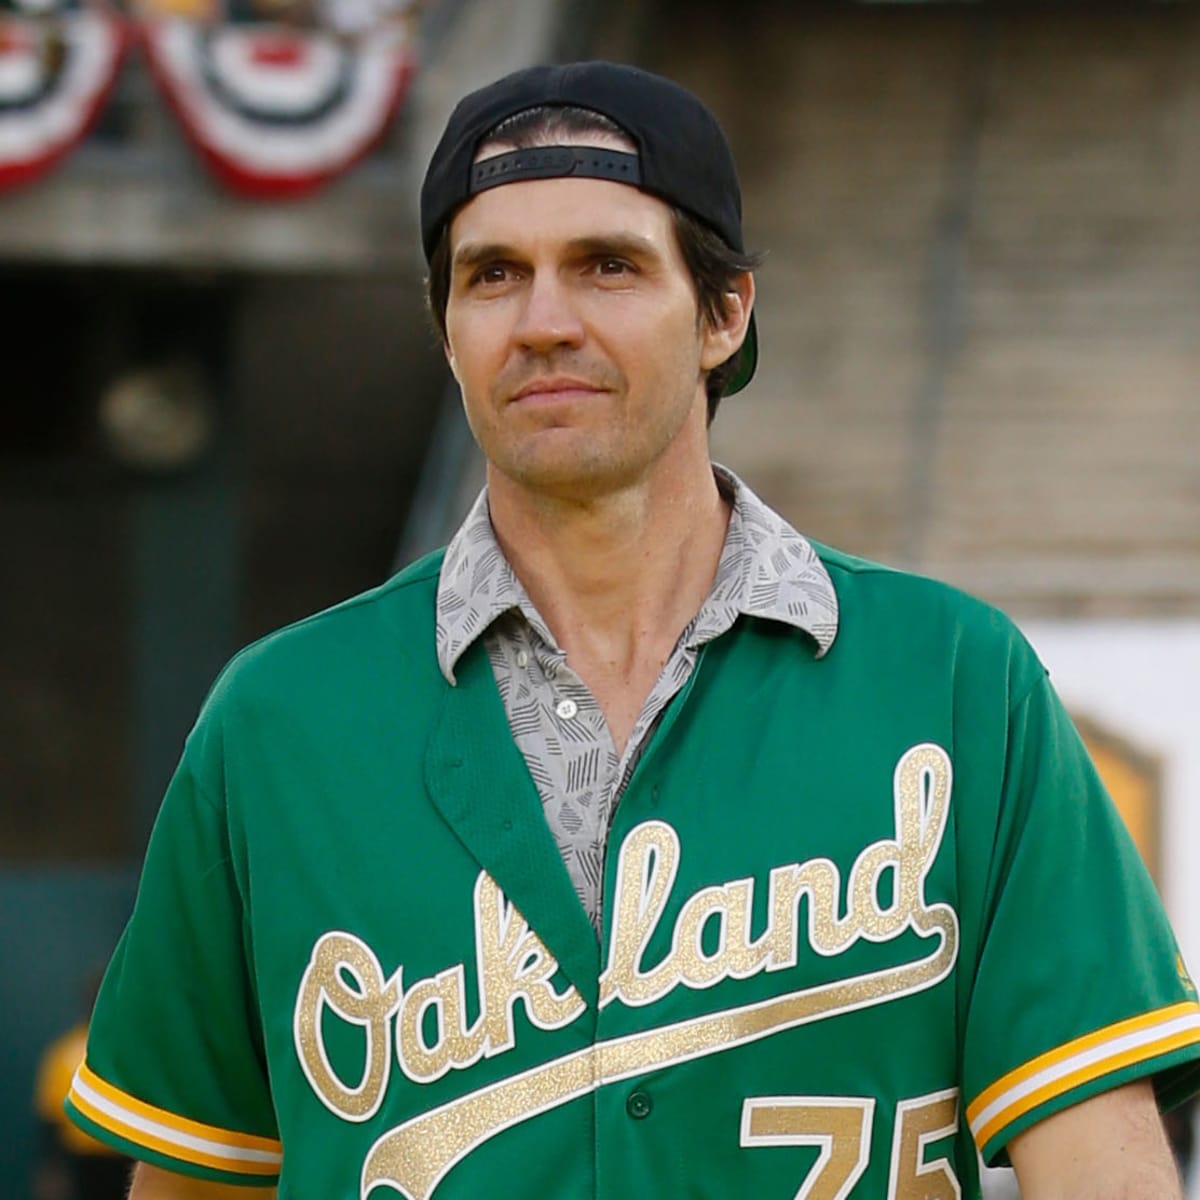 Barry Zito doesn't make Oakland Athletics, headed for Triple-A Nashville  Sounds - ESPN